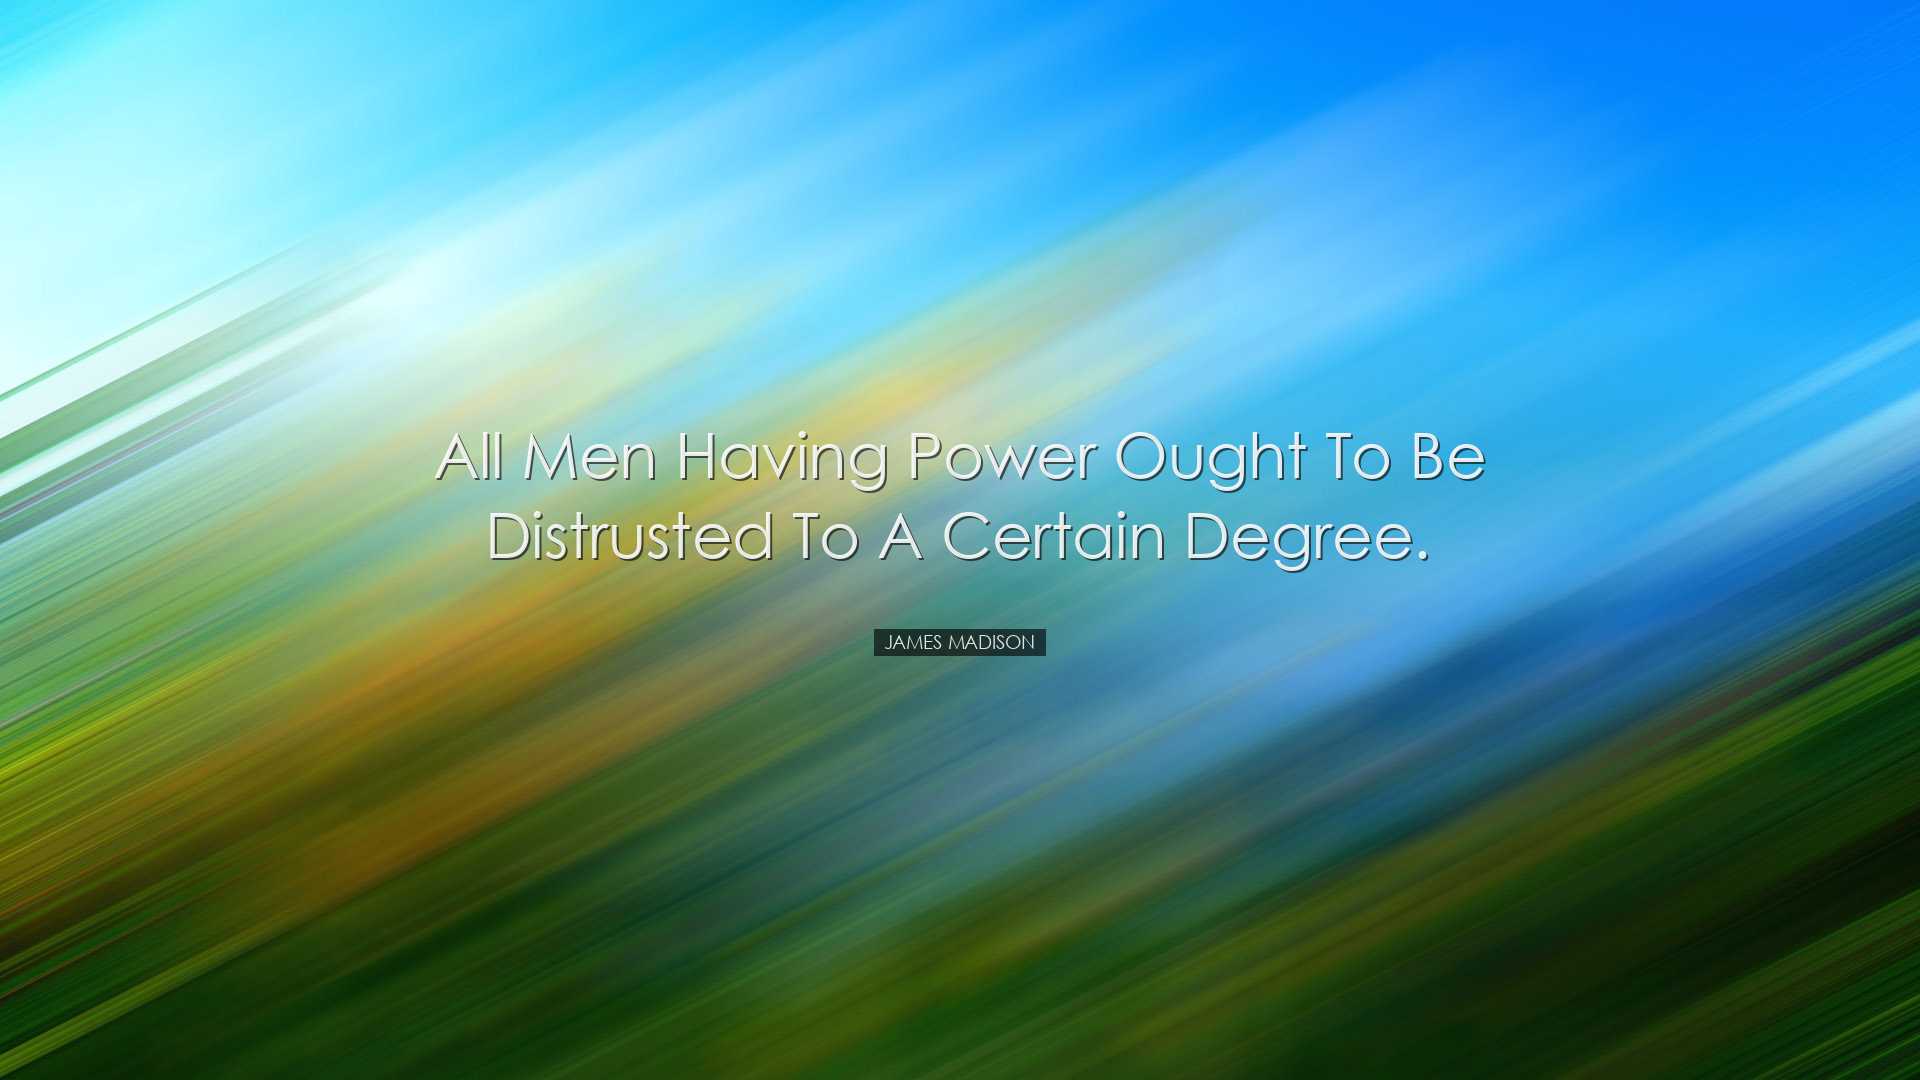 All men having power ought to be distrusted to a certain degree. -